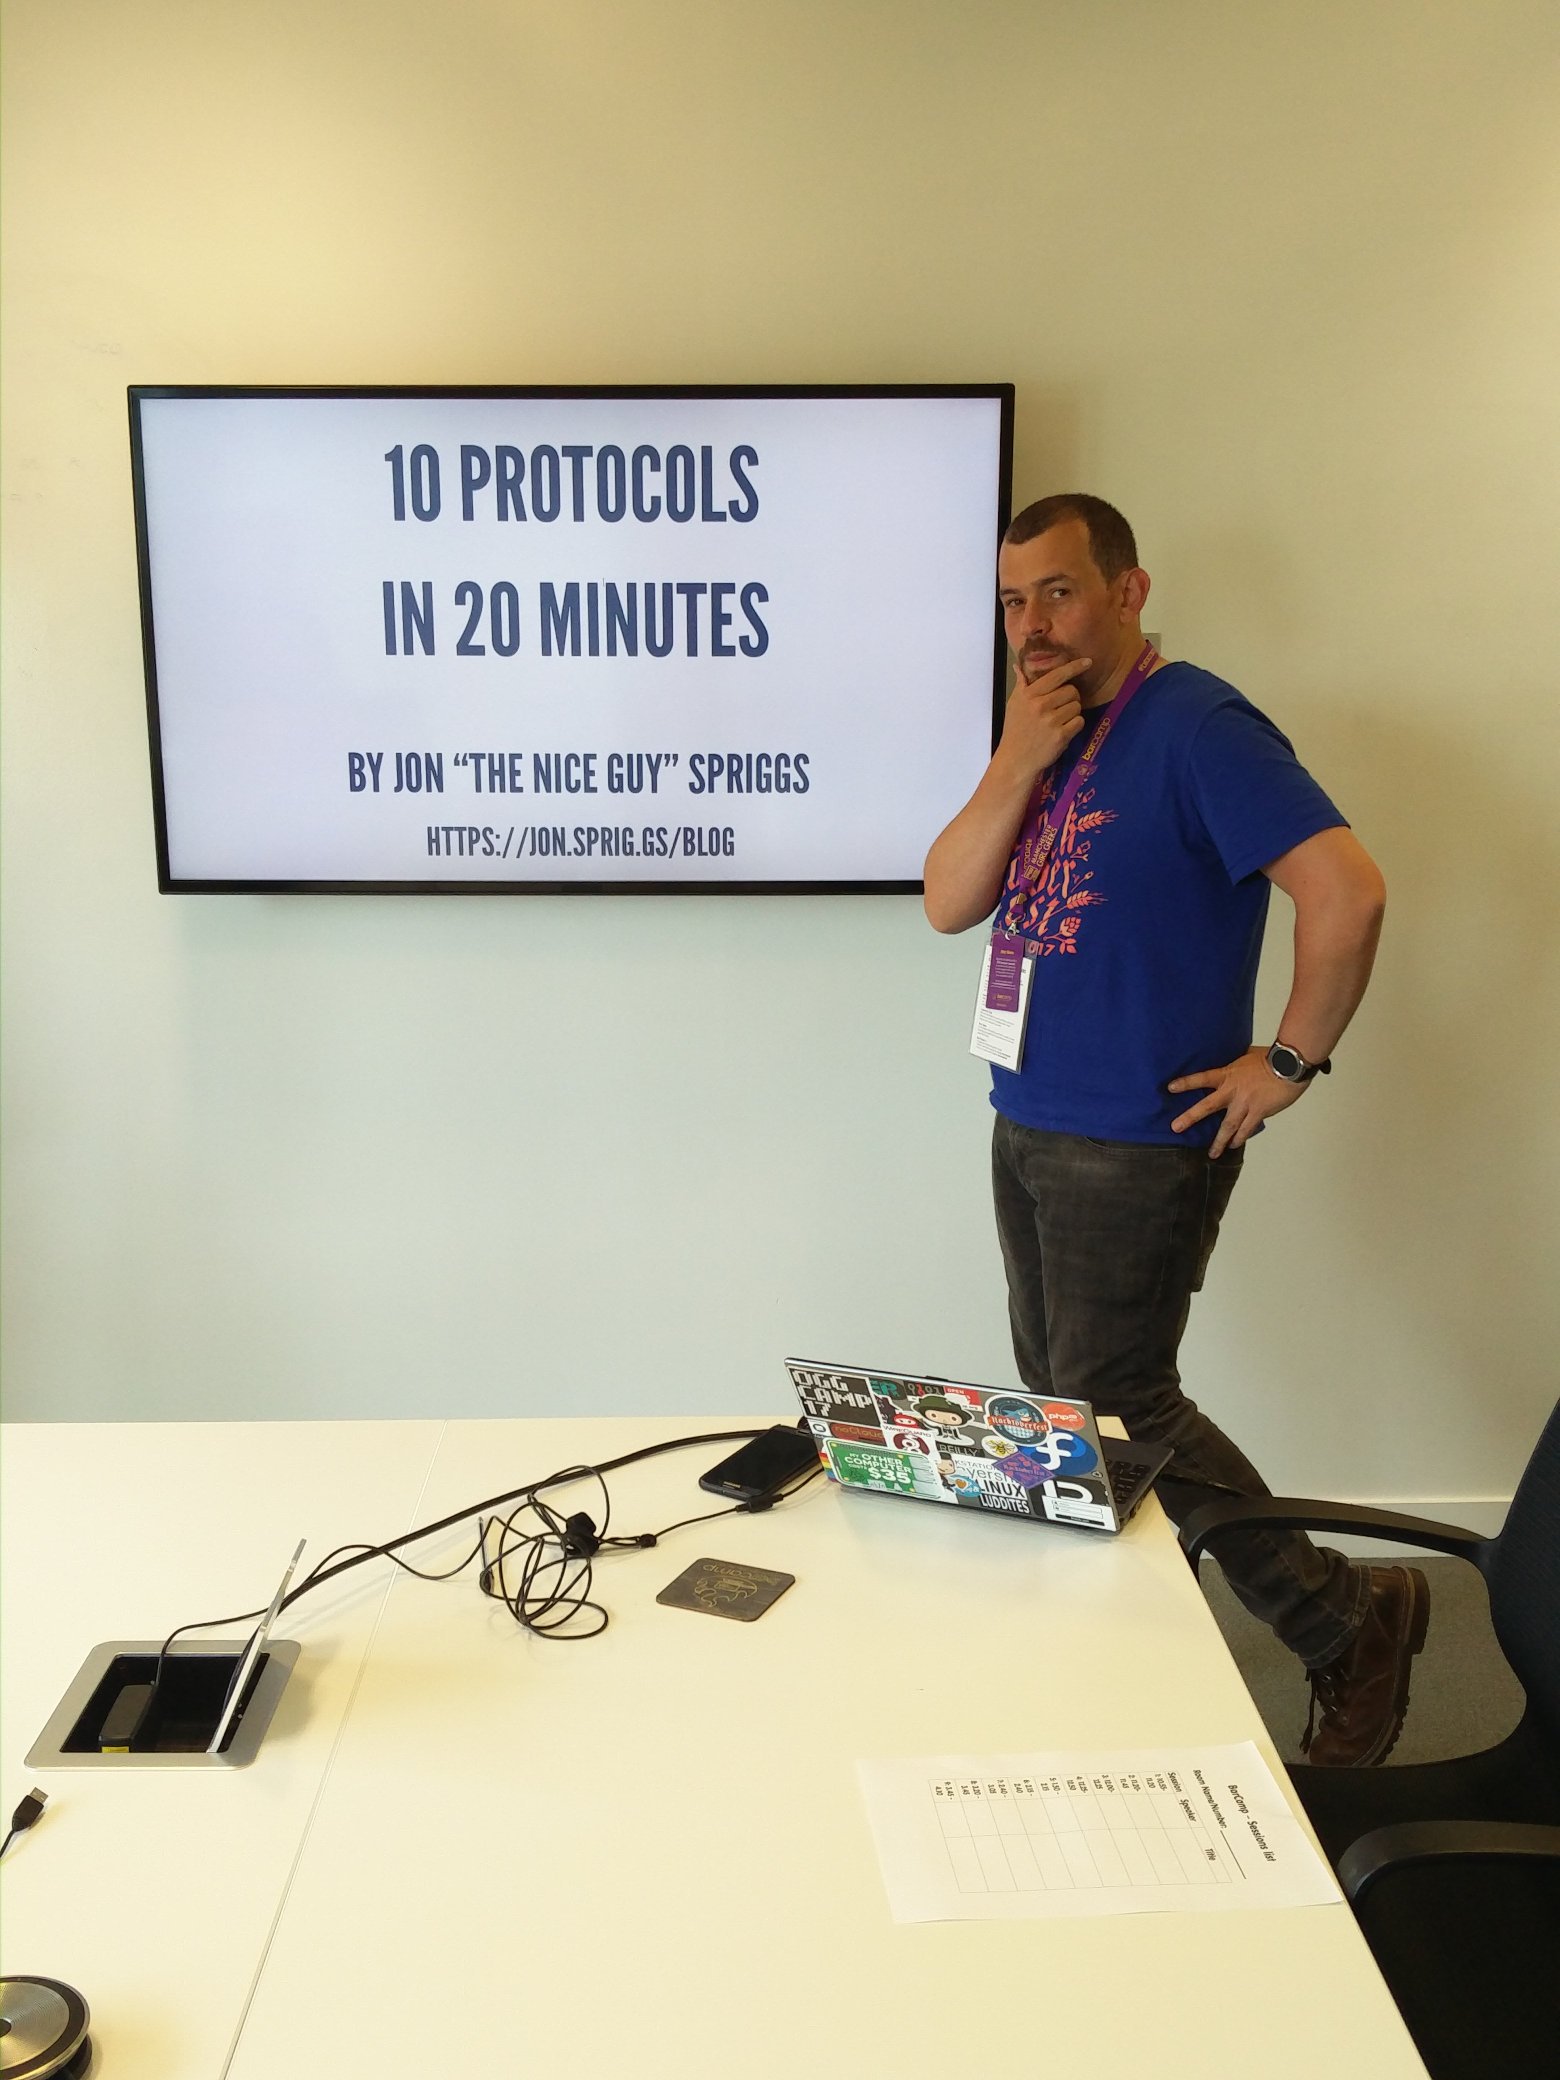 A picture of Jon Spriggs next to a projector showing '10 protocols in 20 minutes'